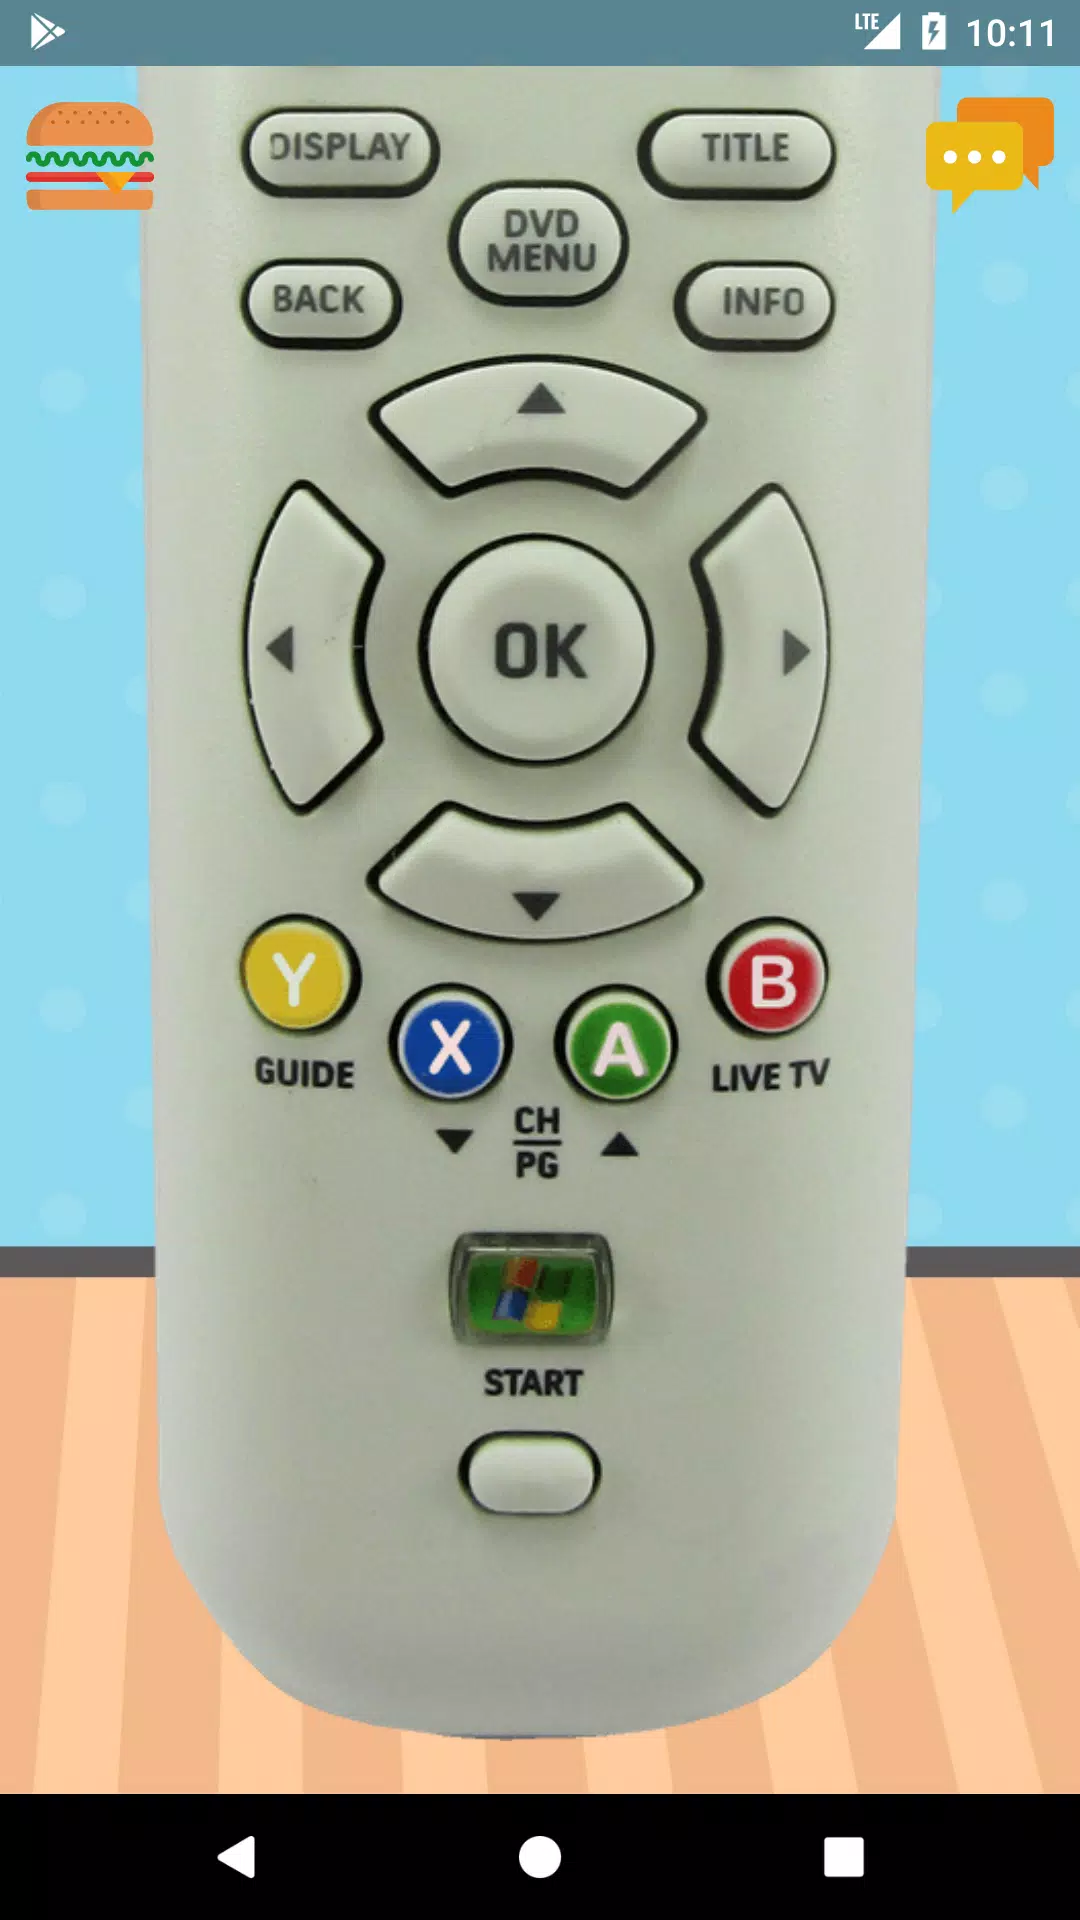 Remote Control for Xbox One/Xbox 360 for Android - APK Download